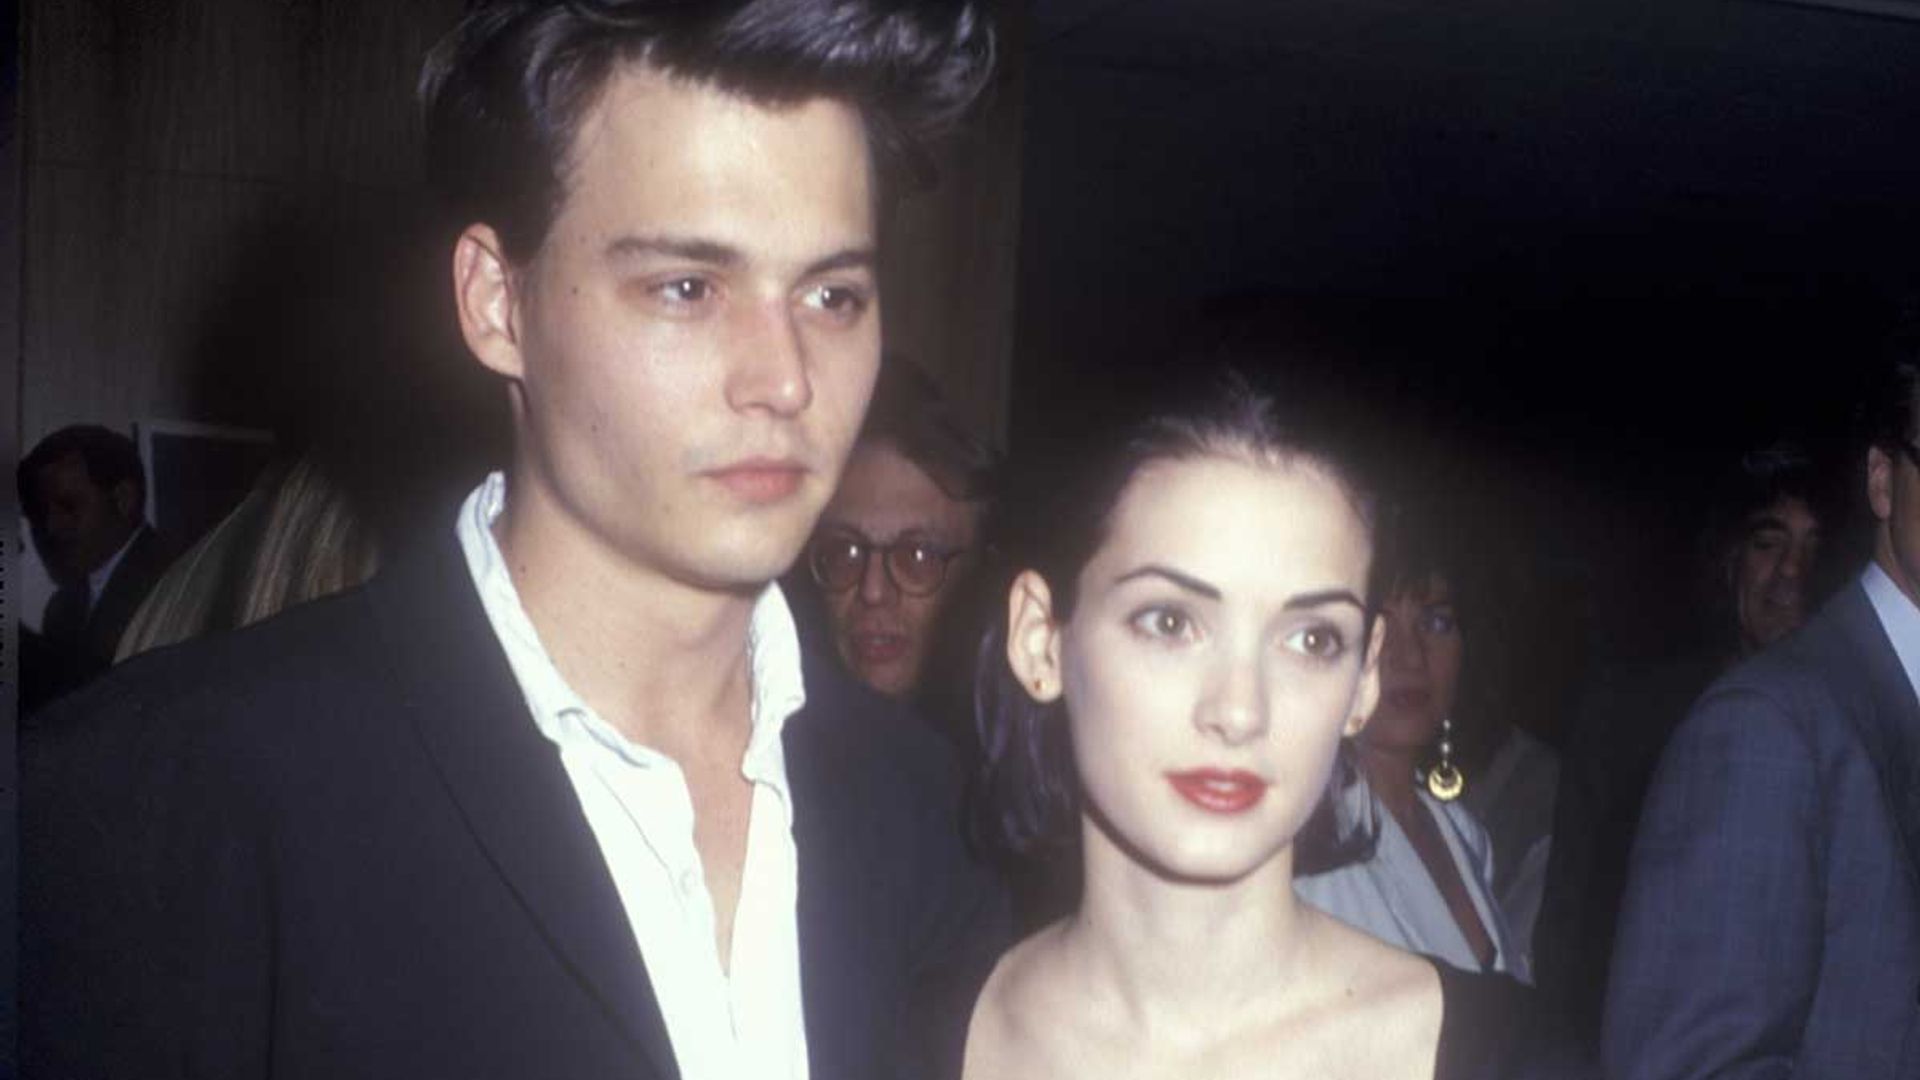 Winona Ryder admits she couldn't 'take care' of herself after Johnny Depp split